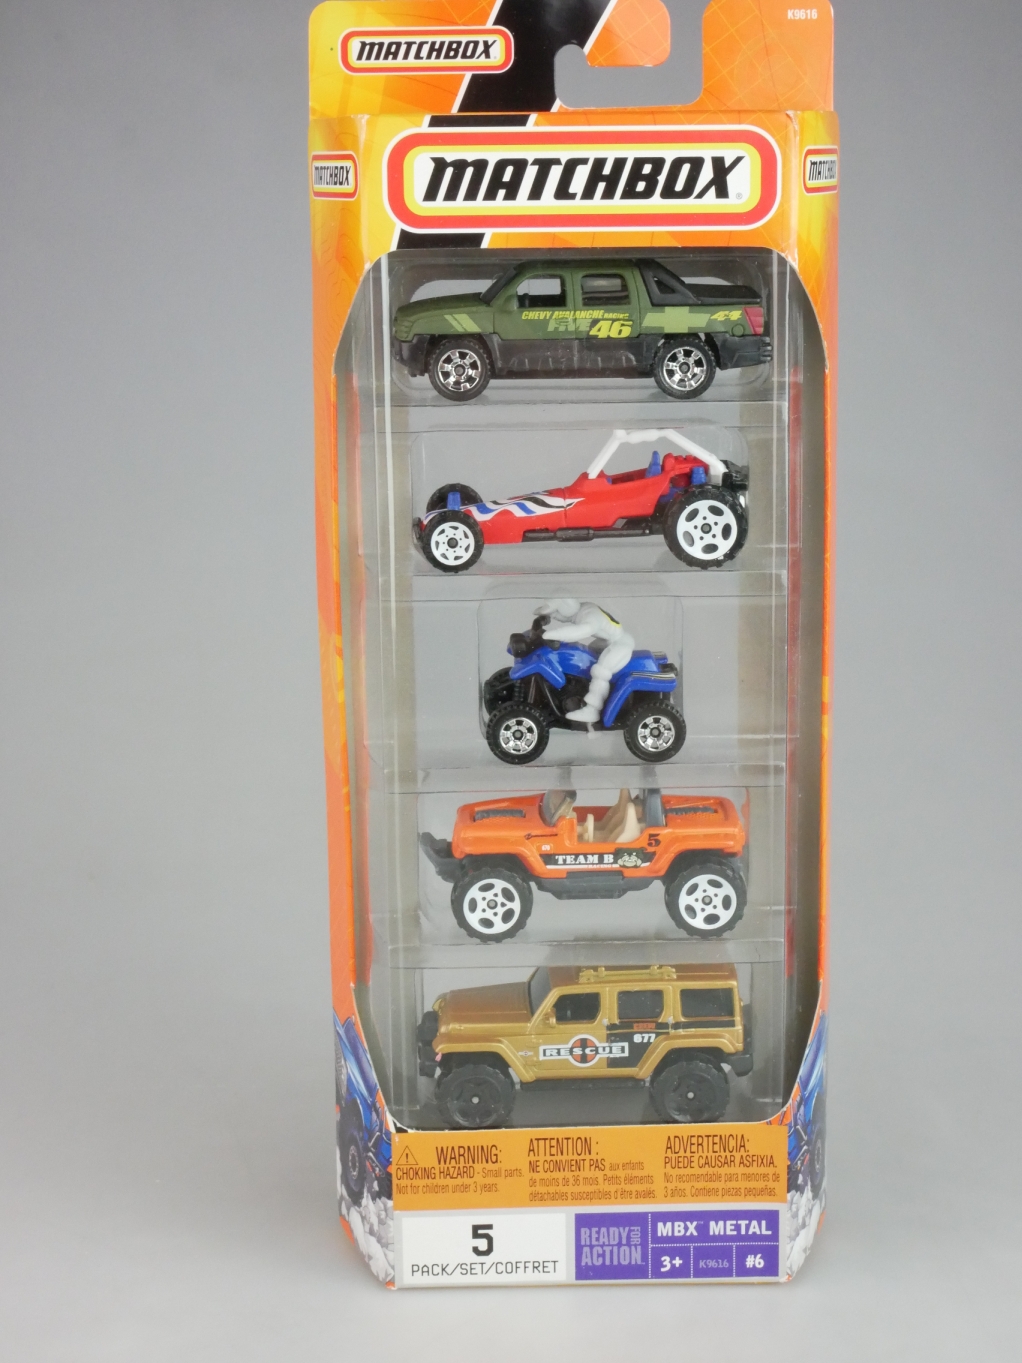 5-Pack 2007 Ready for action - 19730